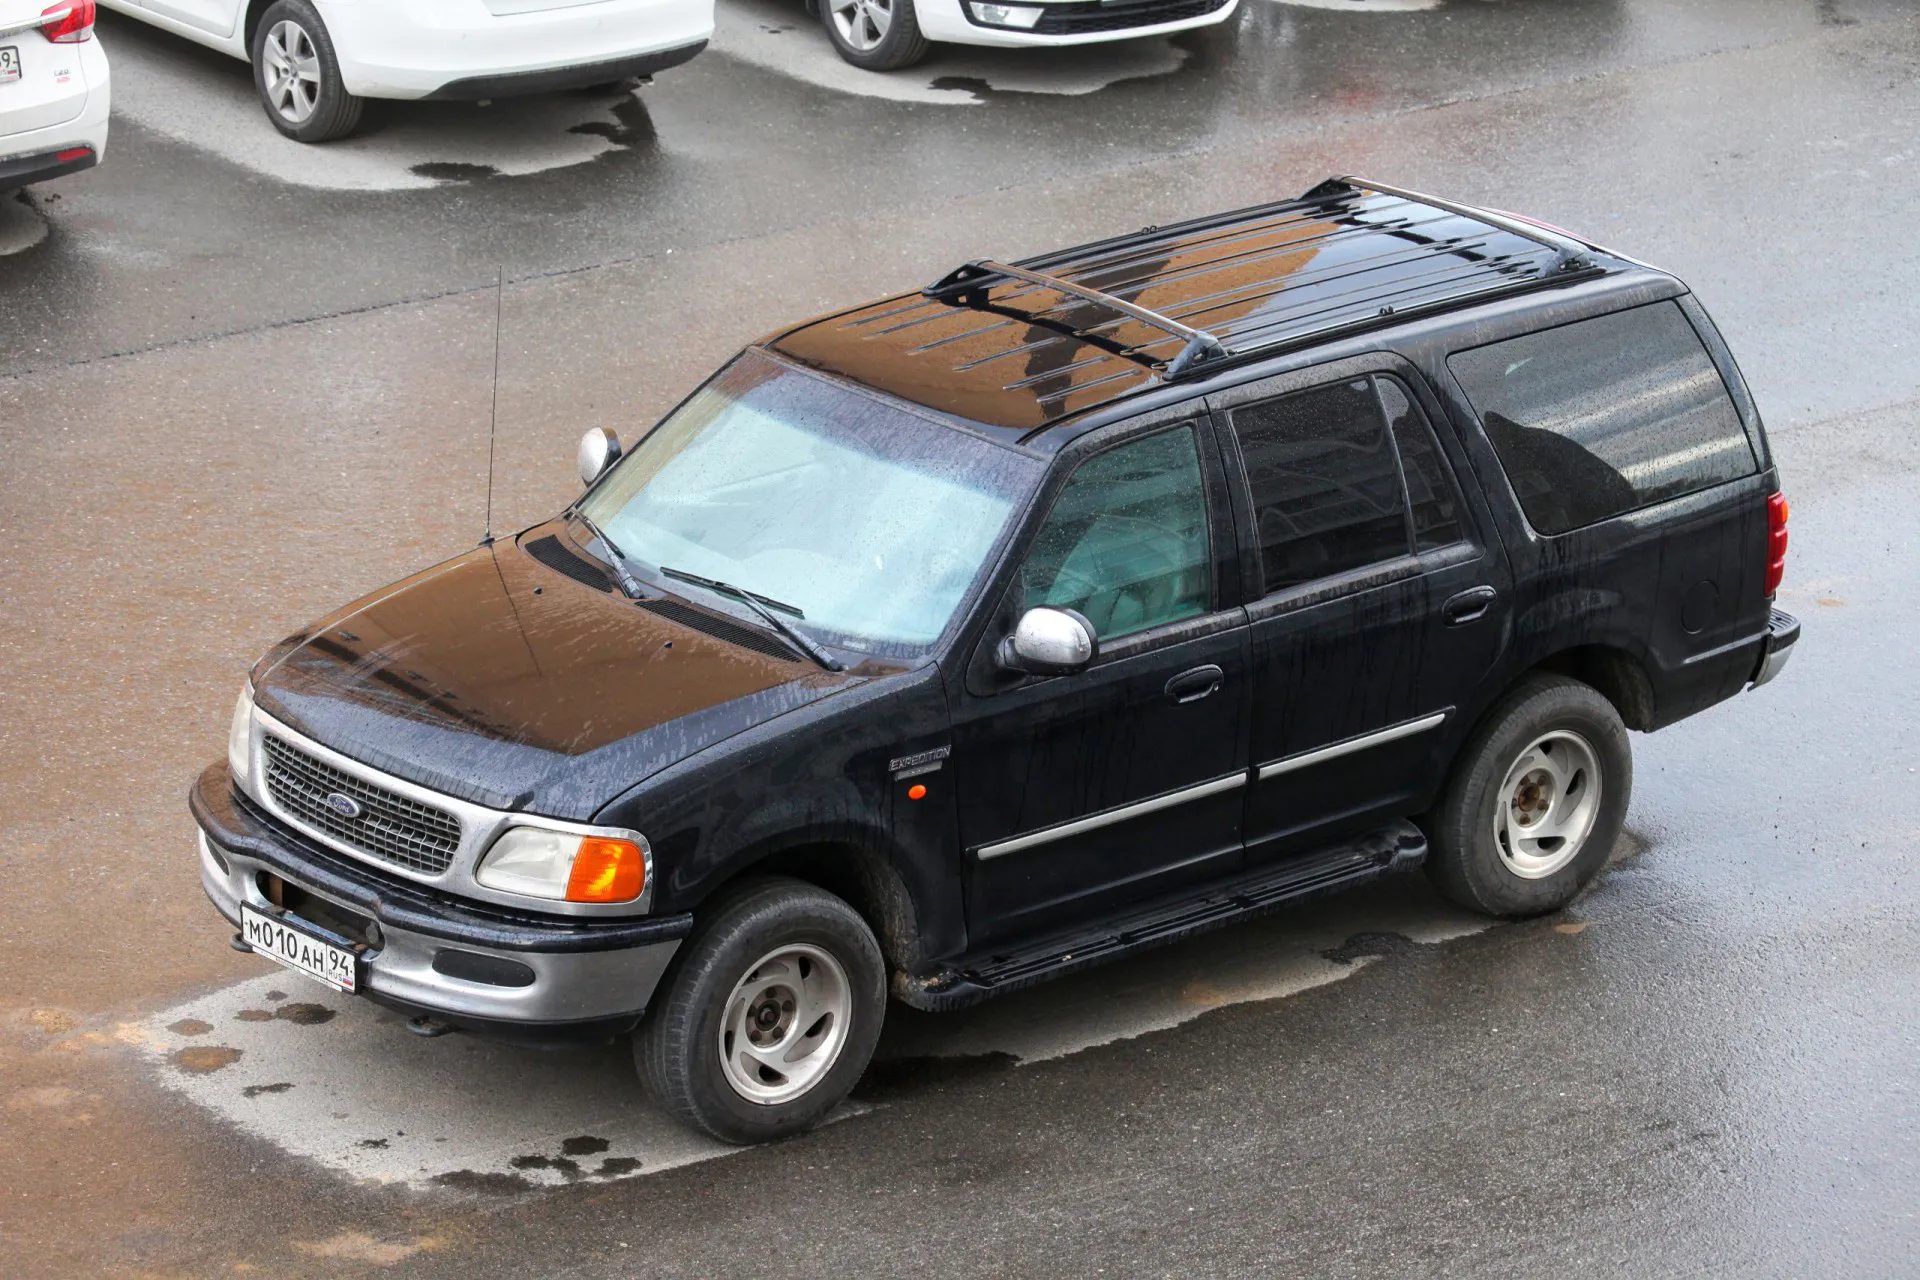 Black offroad car 2001 Ford Expedition in the city street.